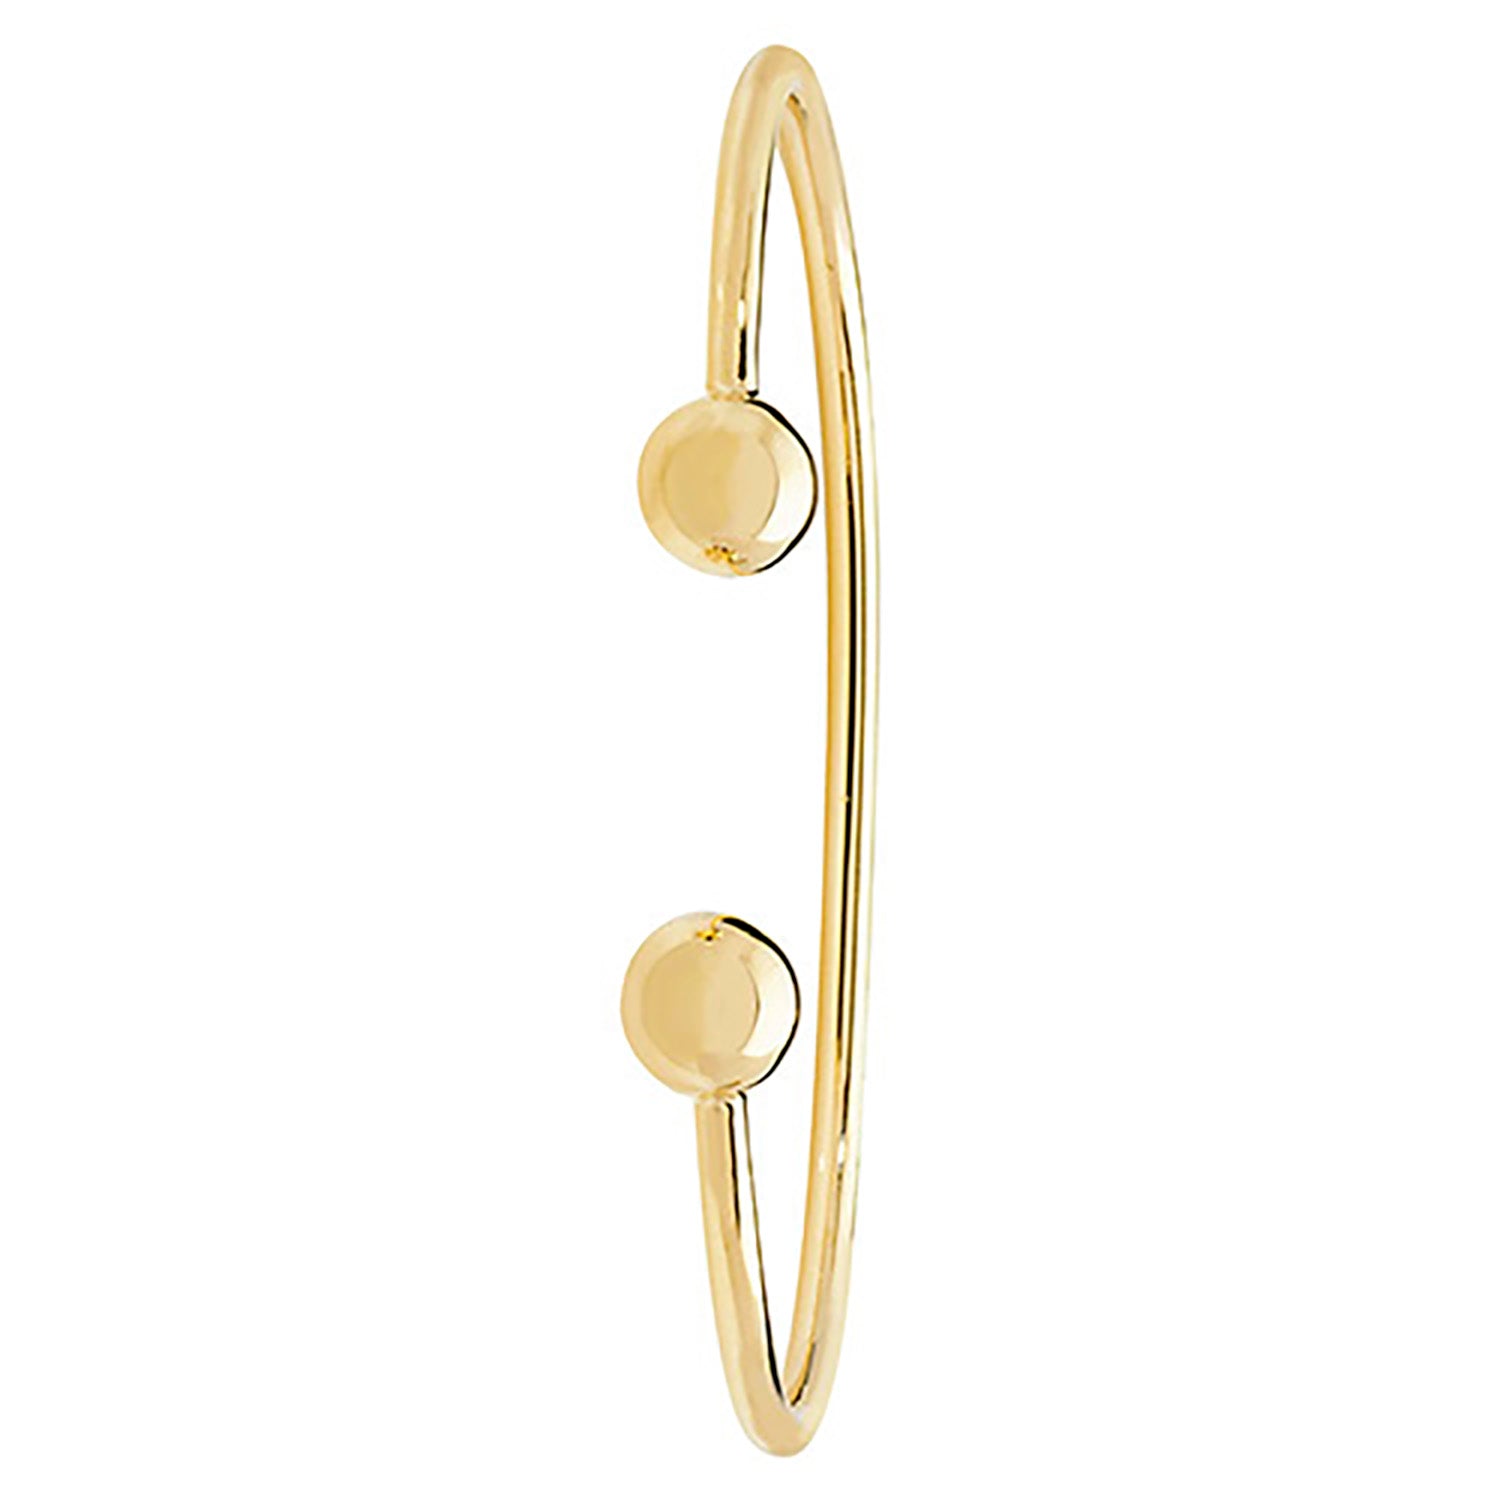 9CT GOLD SOLID TORC BANGLE